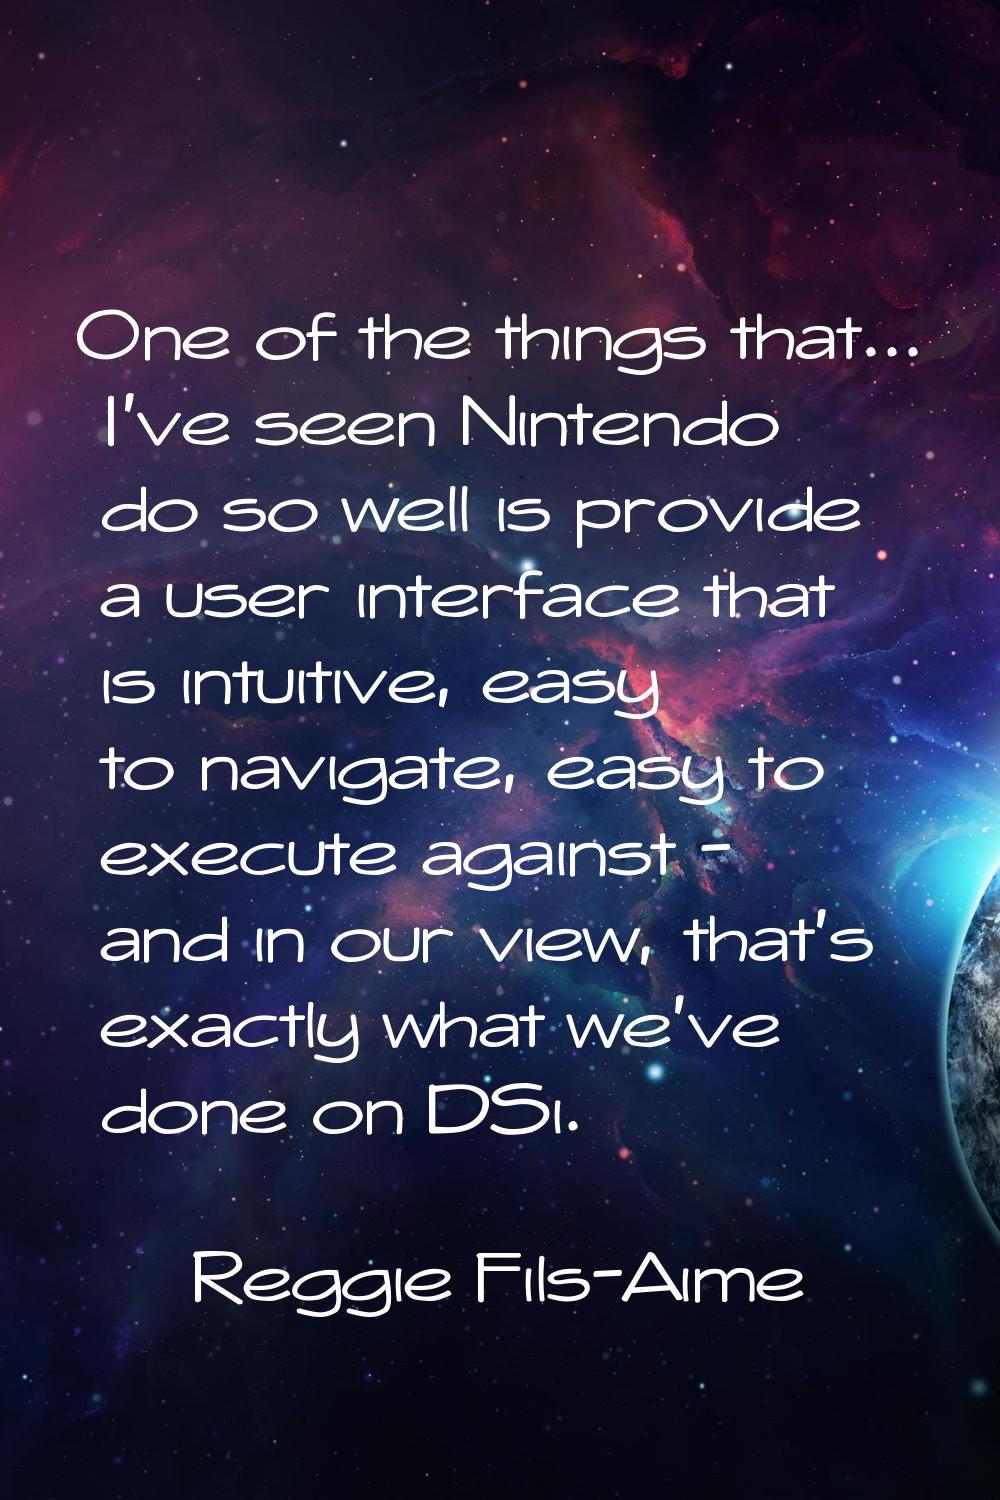 One of the things that... I've seen Nintendo do so well is provide a user interface that is intuiti